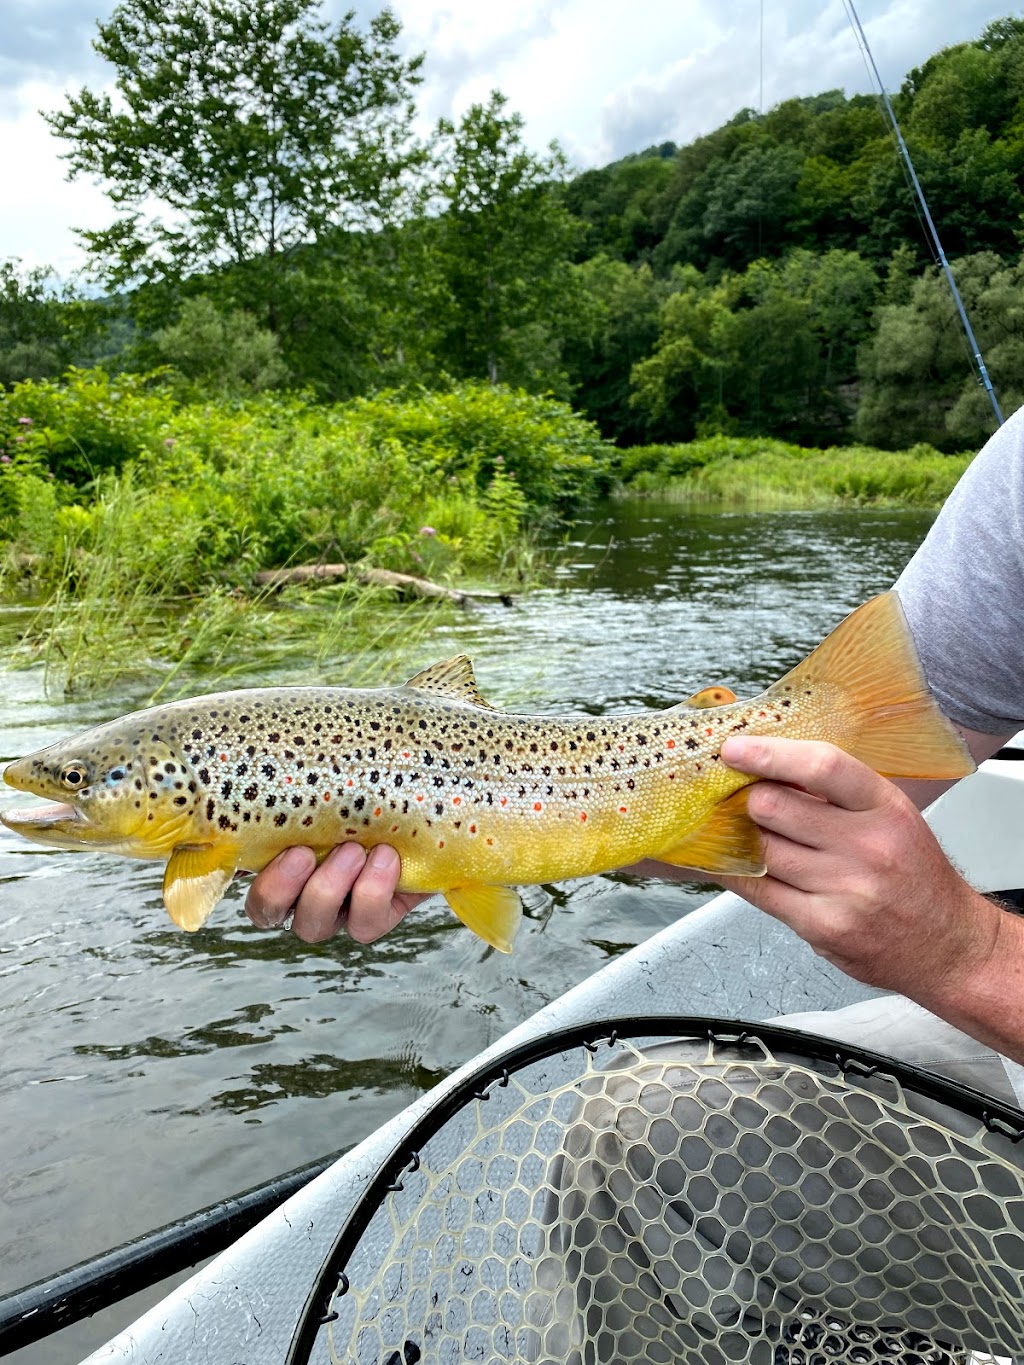 Anglers Den Fly Shop | 11 W Main St, Pawling, NY 12564 | Phone: (845) 855-5182